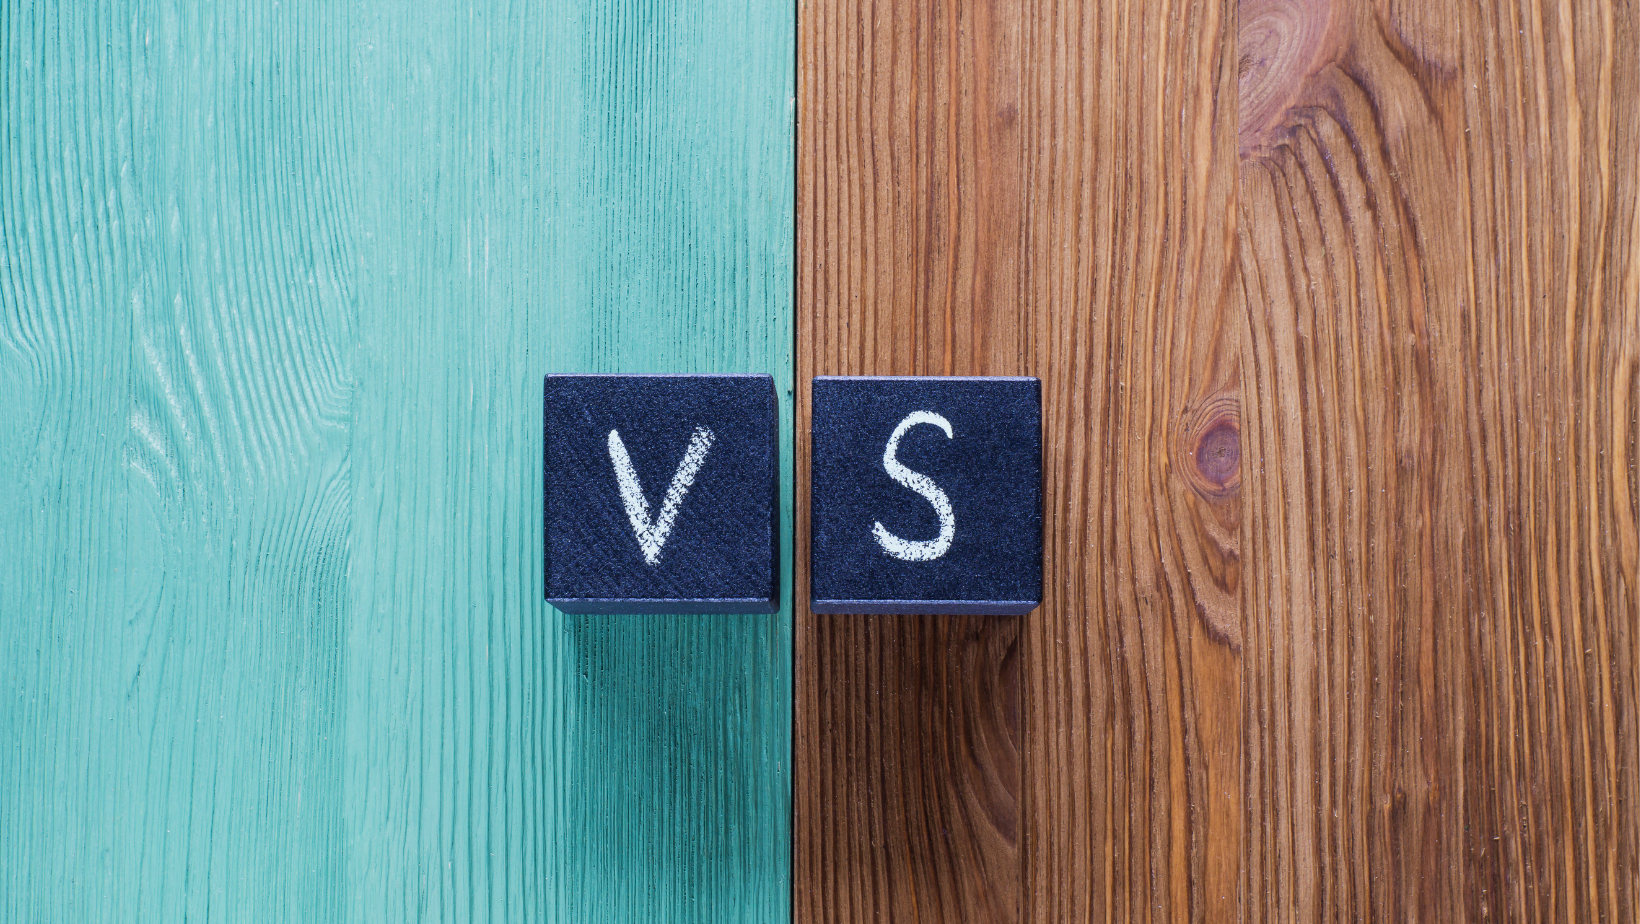 Which is better for you: Content marketing vs Paid advertising?